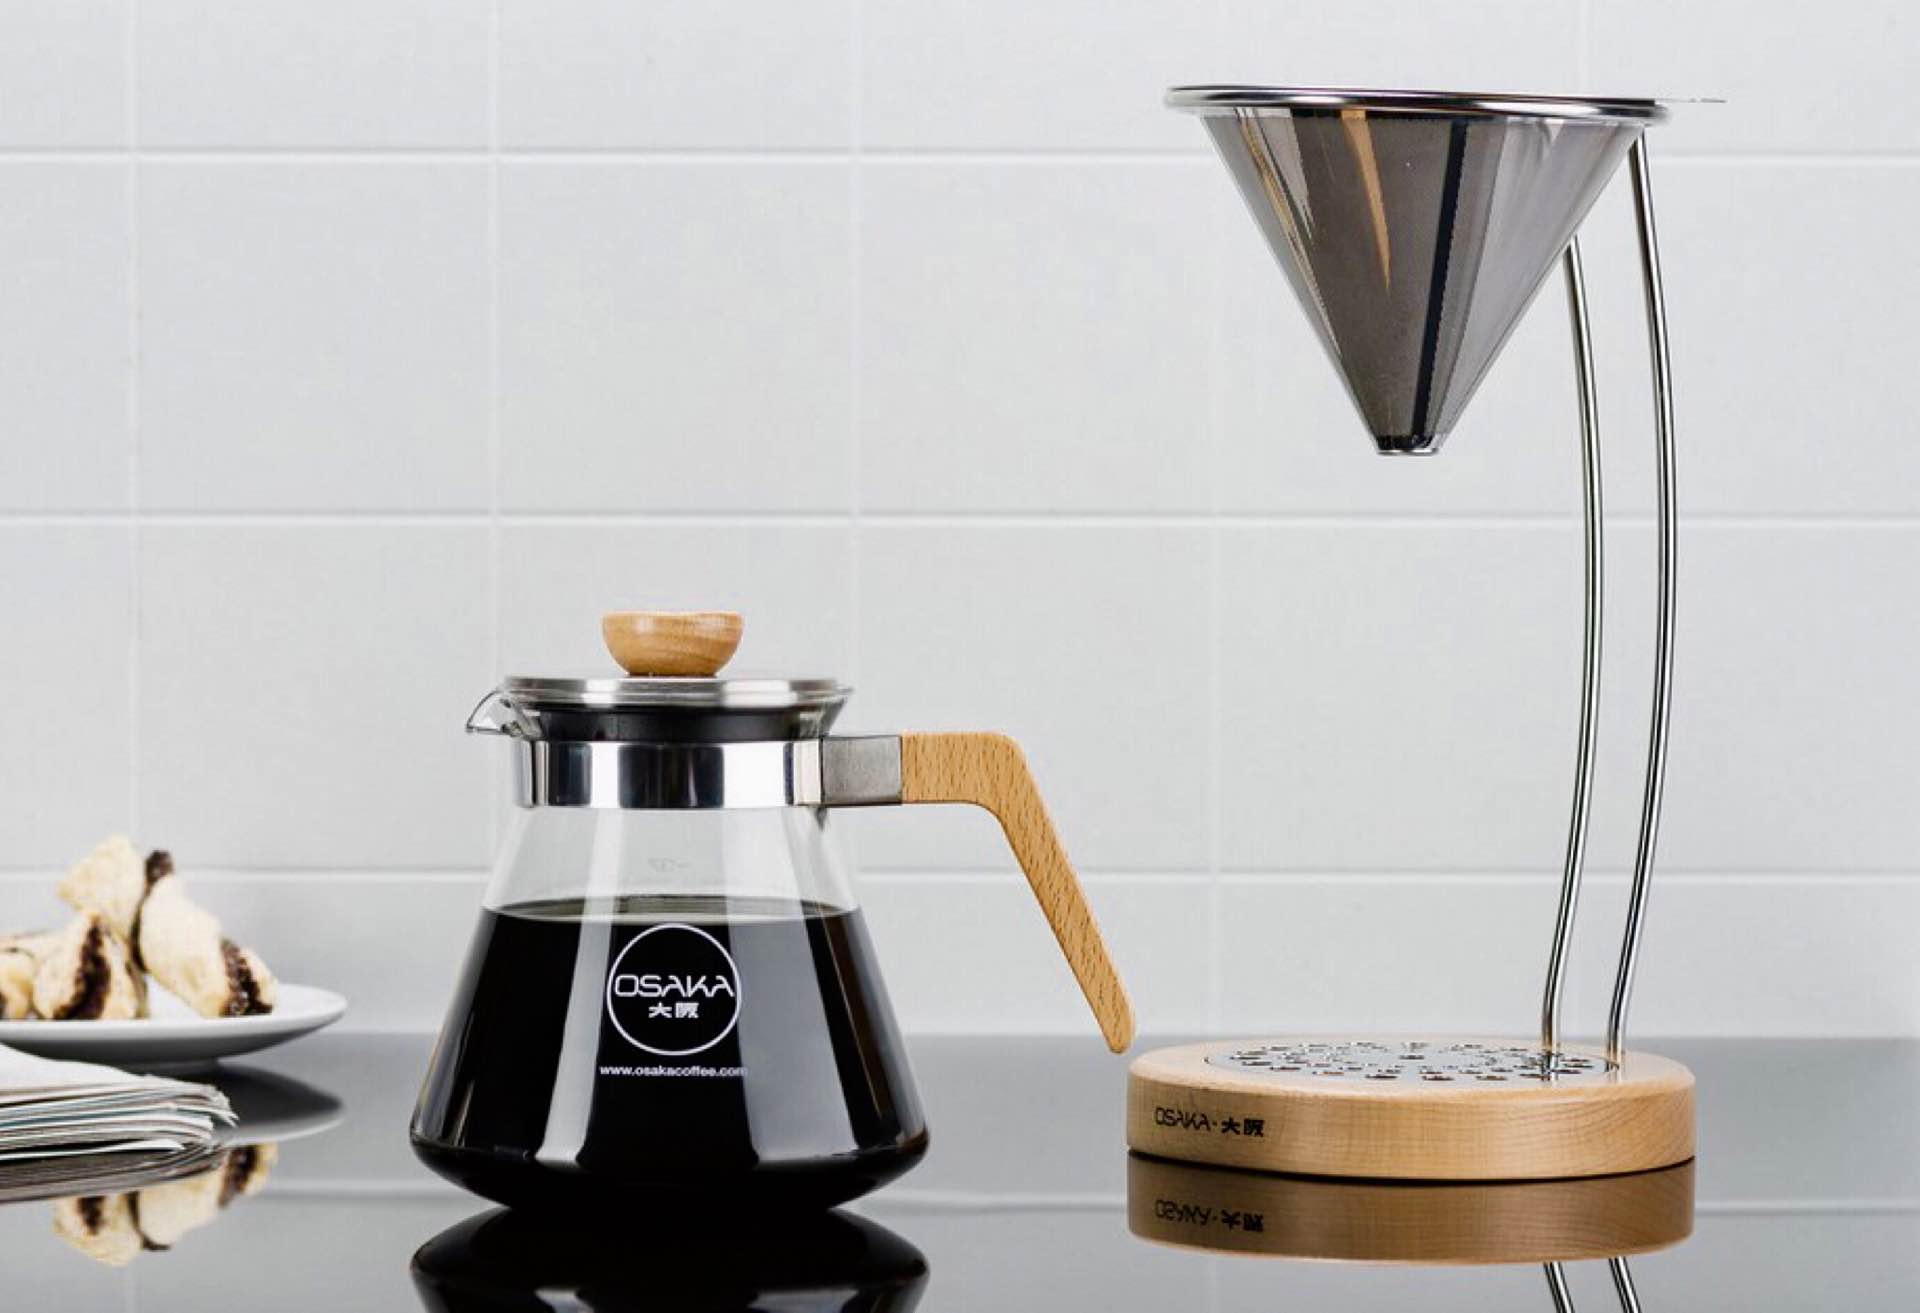 Osaka pour-over driper + wood stand. ($45 for mahogany, $50 for natural)